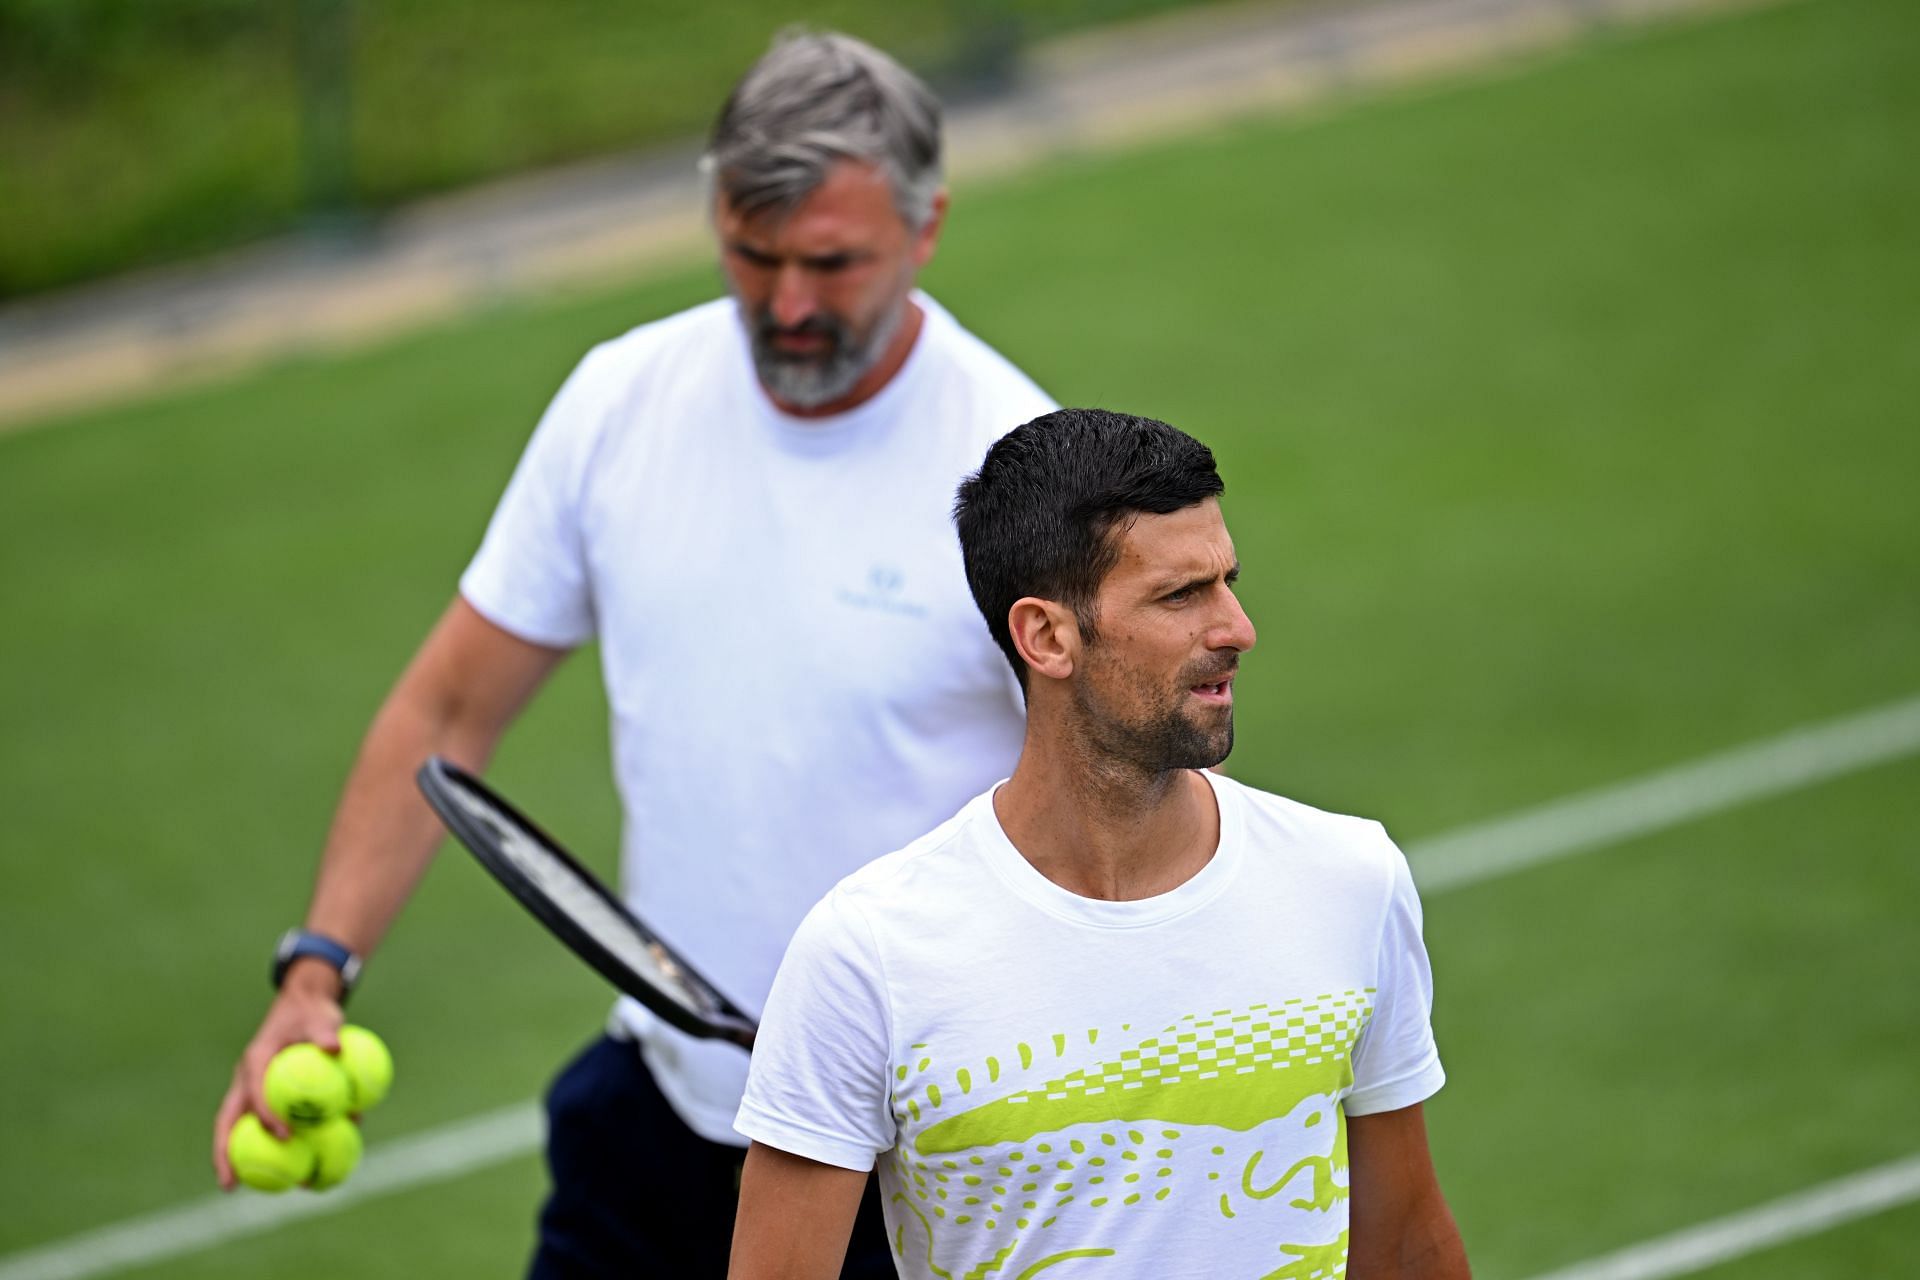 “It’s always my fault for everything” - Novak Djokovic’s coach Goran Ivanisevic jokes about working with the Serb